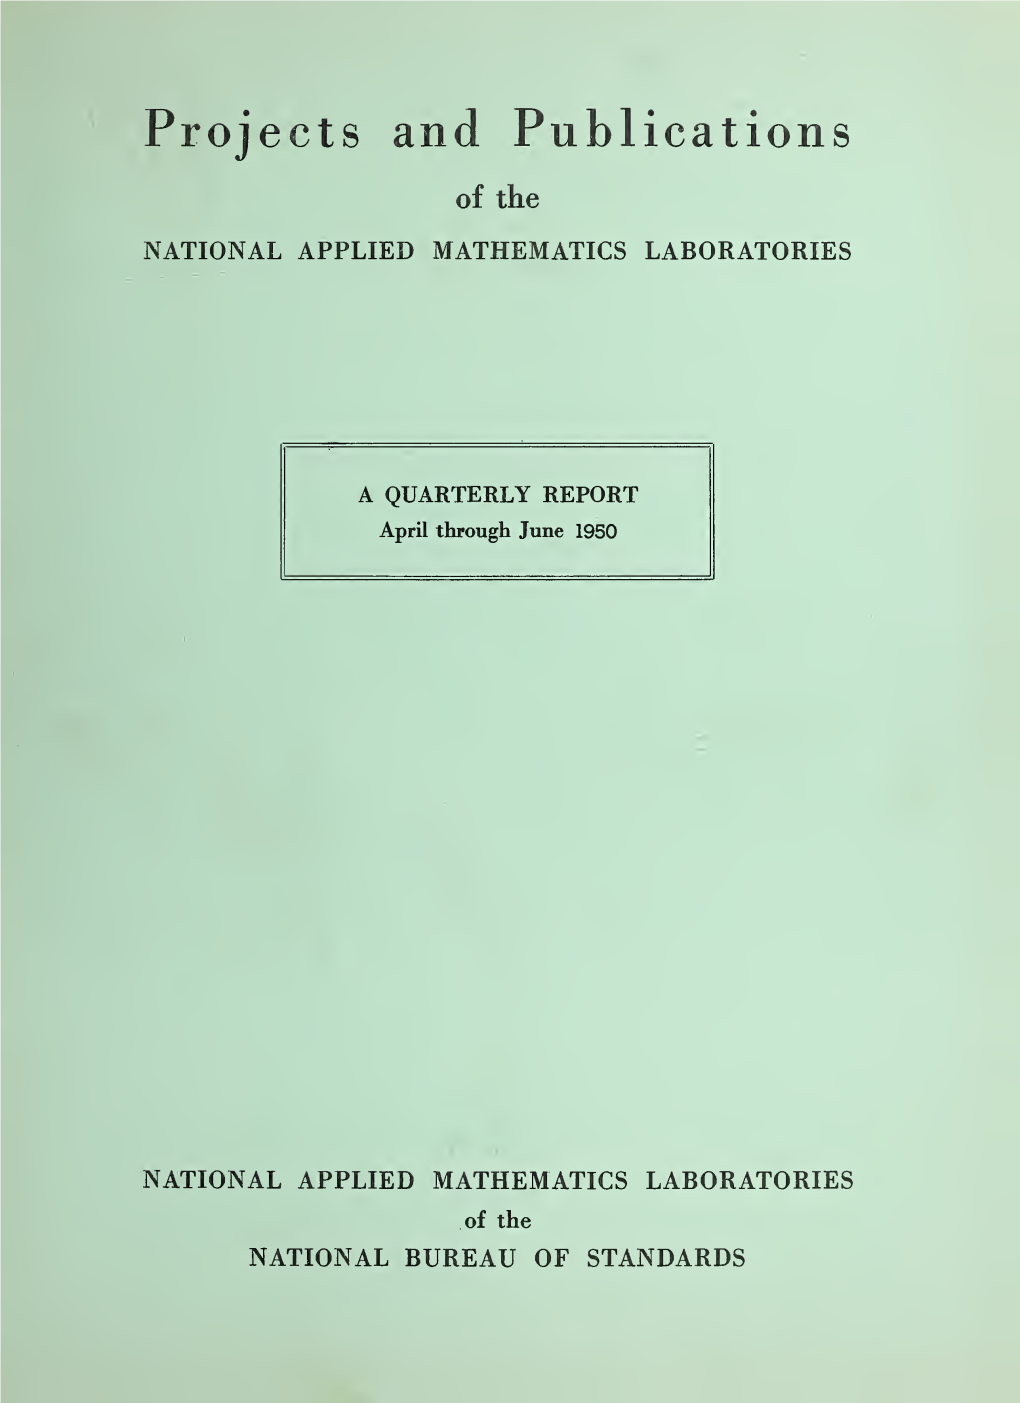 Projects and Publications of the Applied